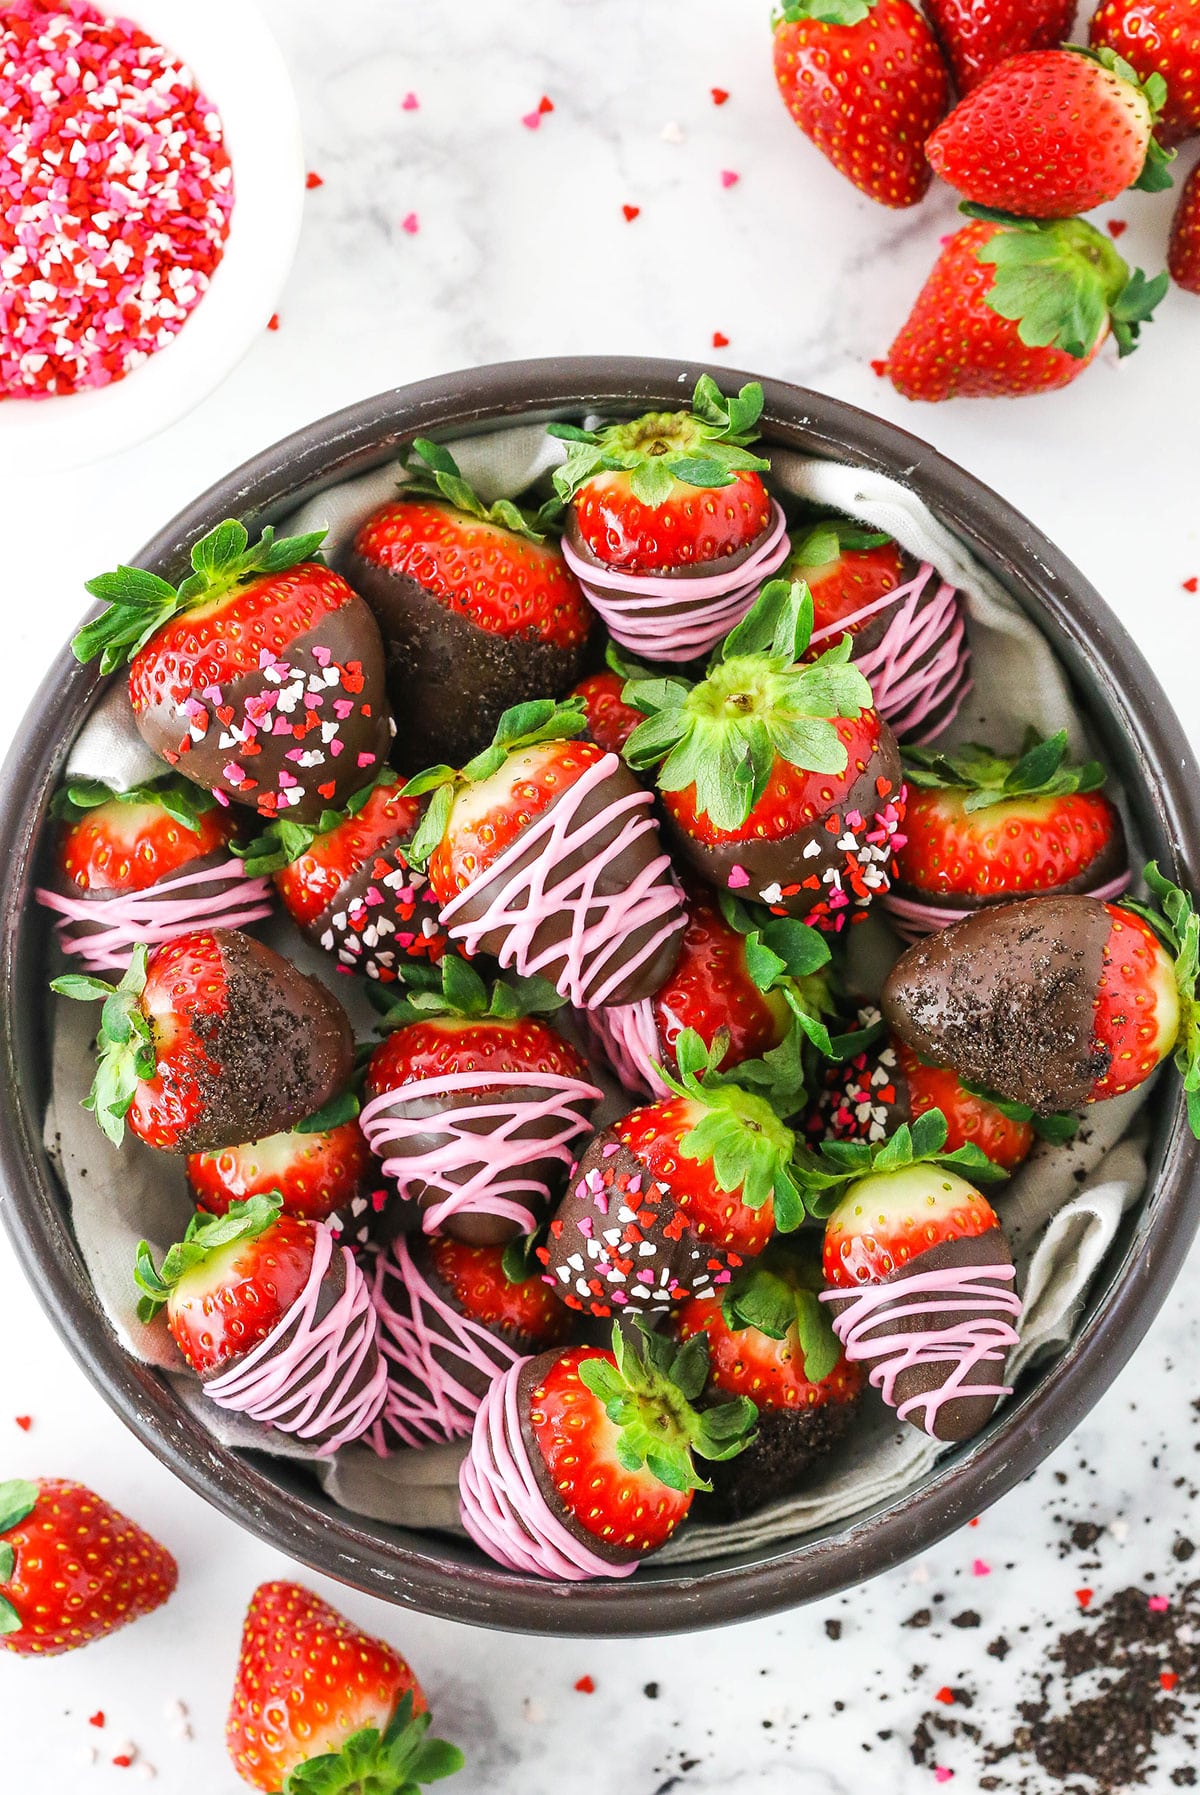 Overhead view of Chocolate Covered Strawberries decorated with pink frosting or red, white and pink sprinkles stacked in a glass bowl on a white table top